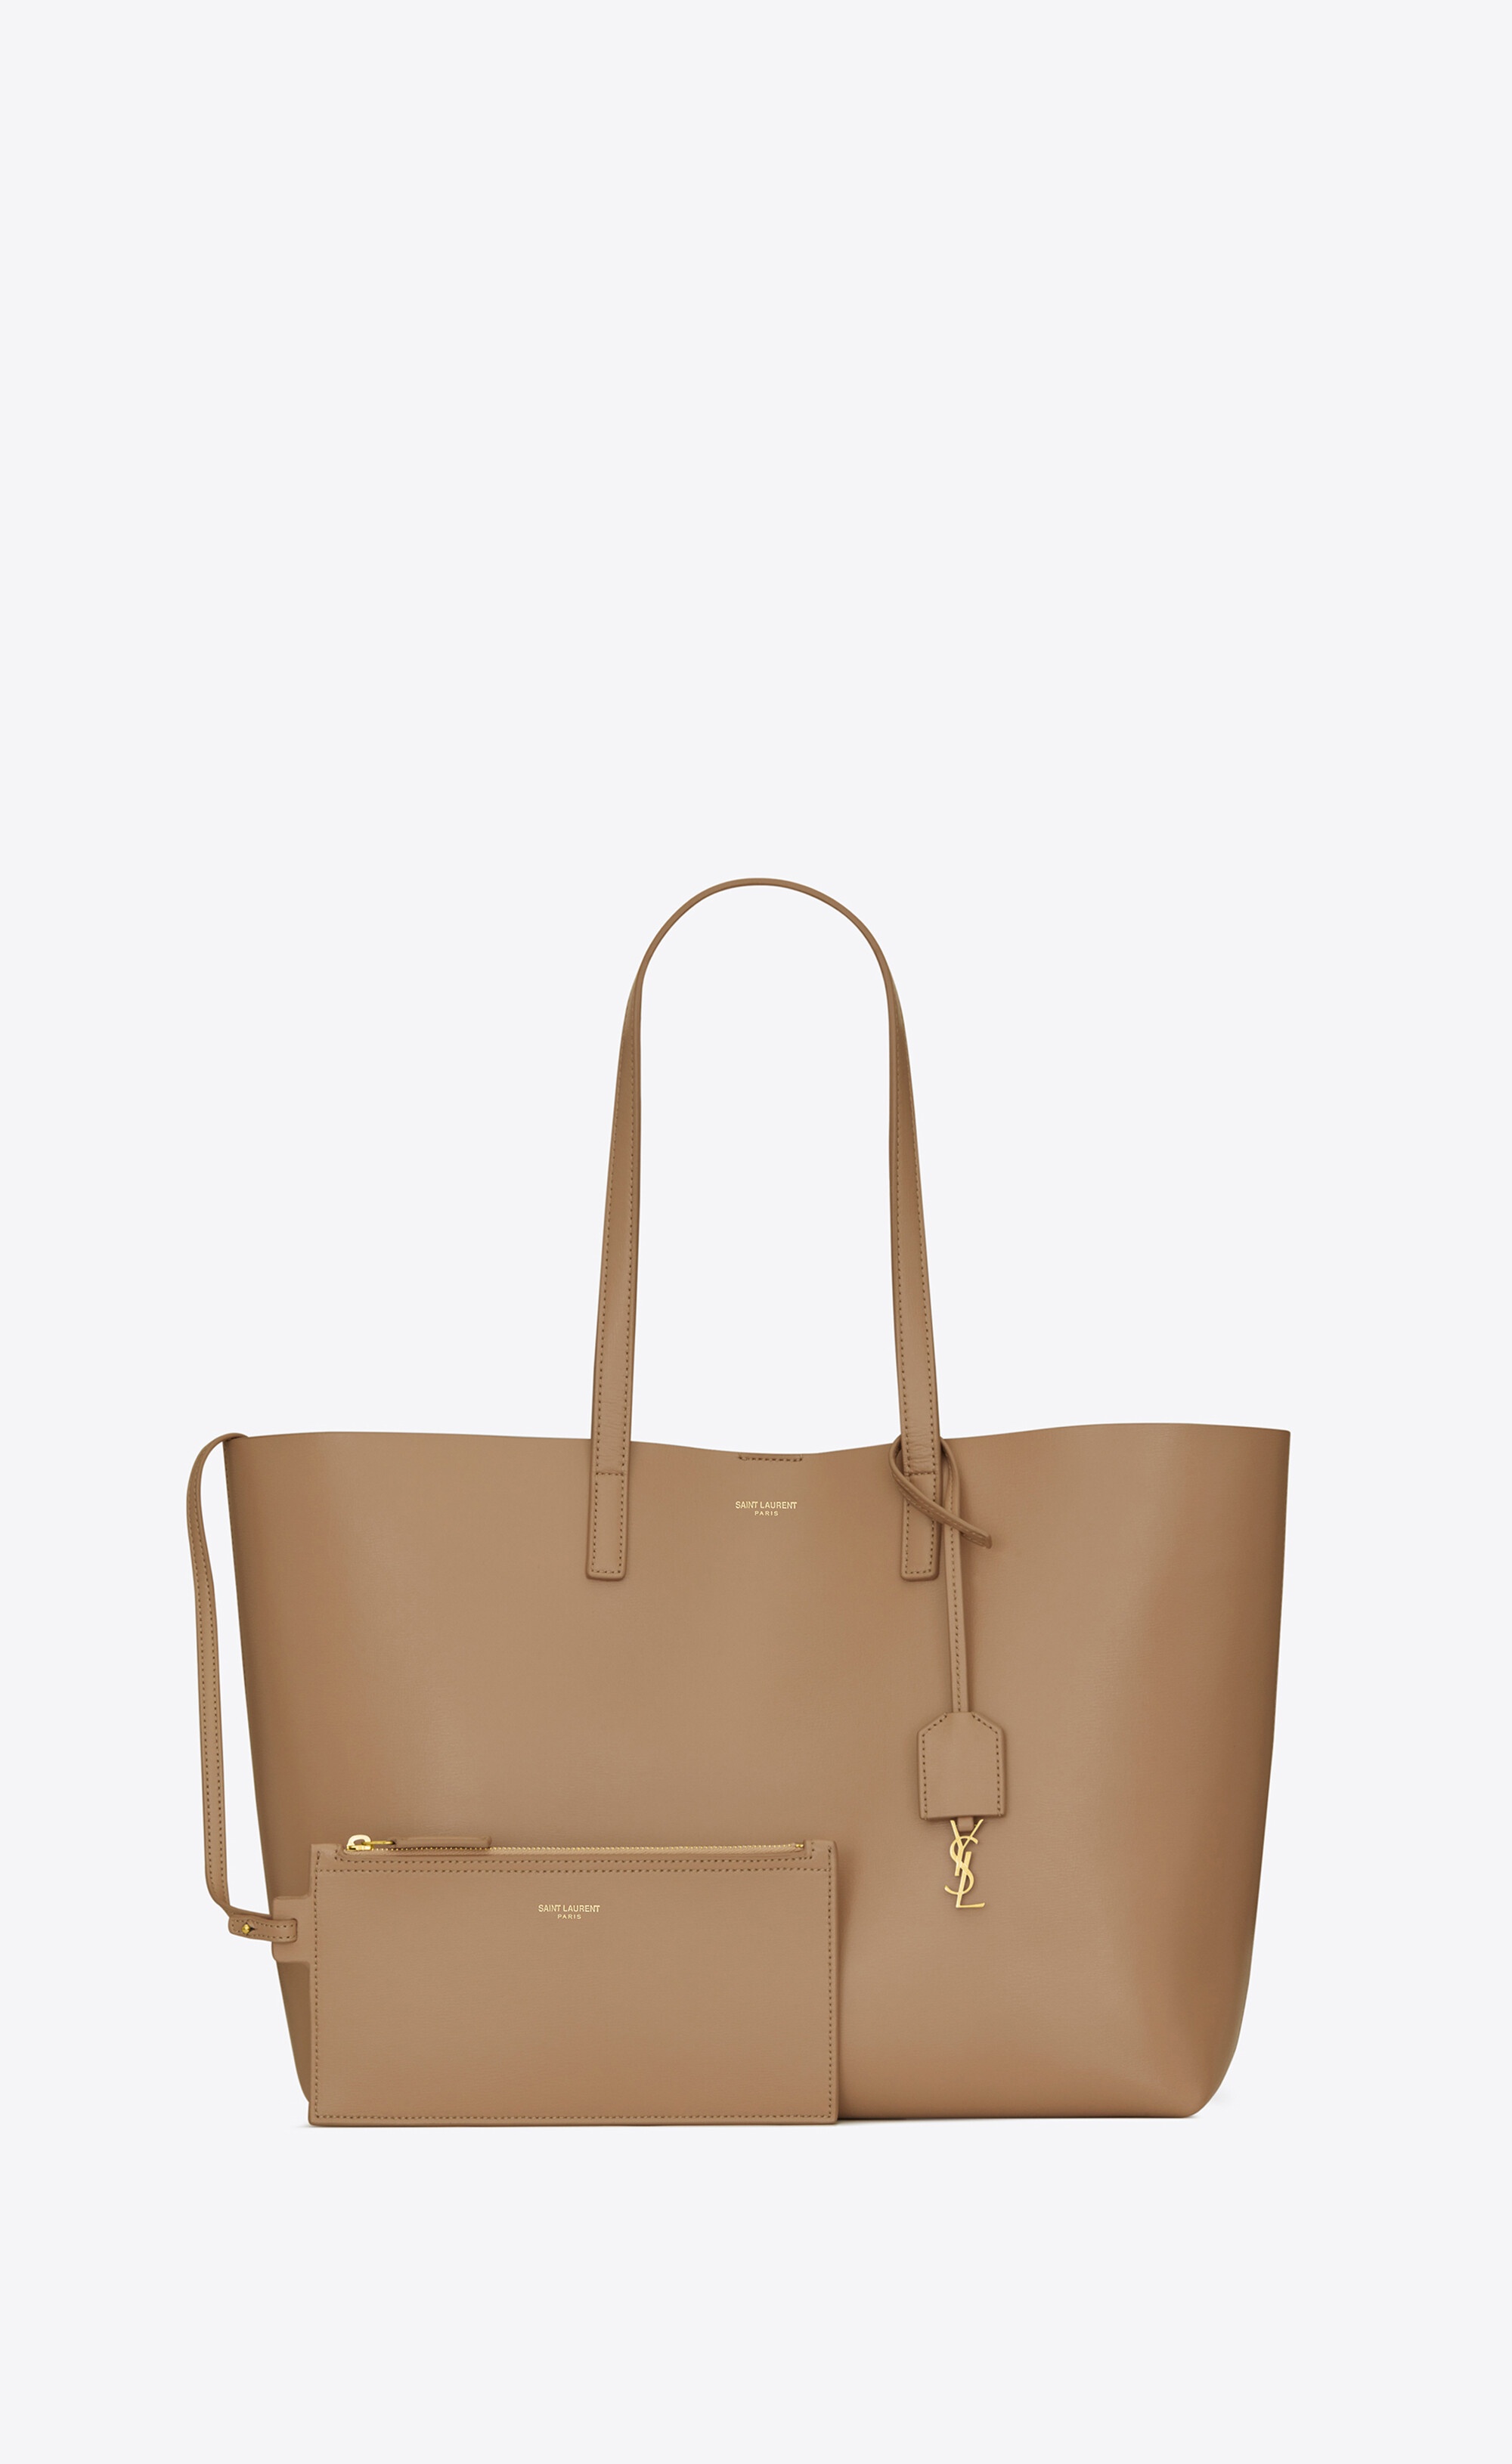 shopping bag saint laurent e/w in supple leather - 3